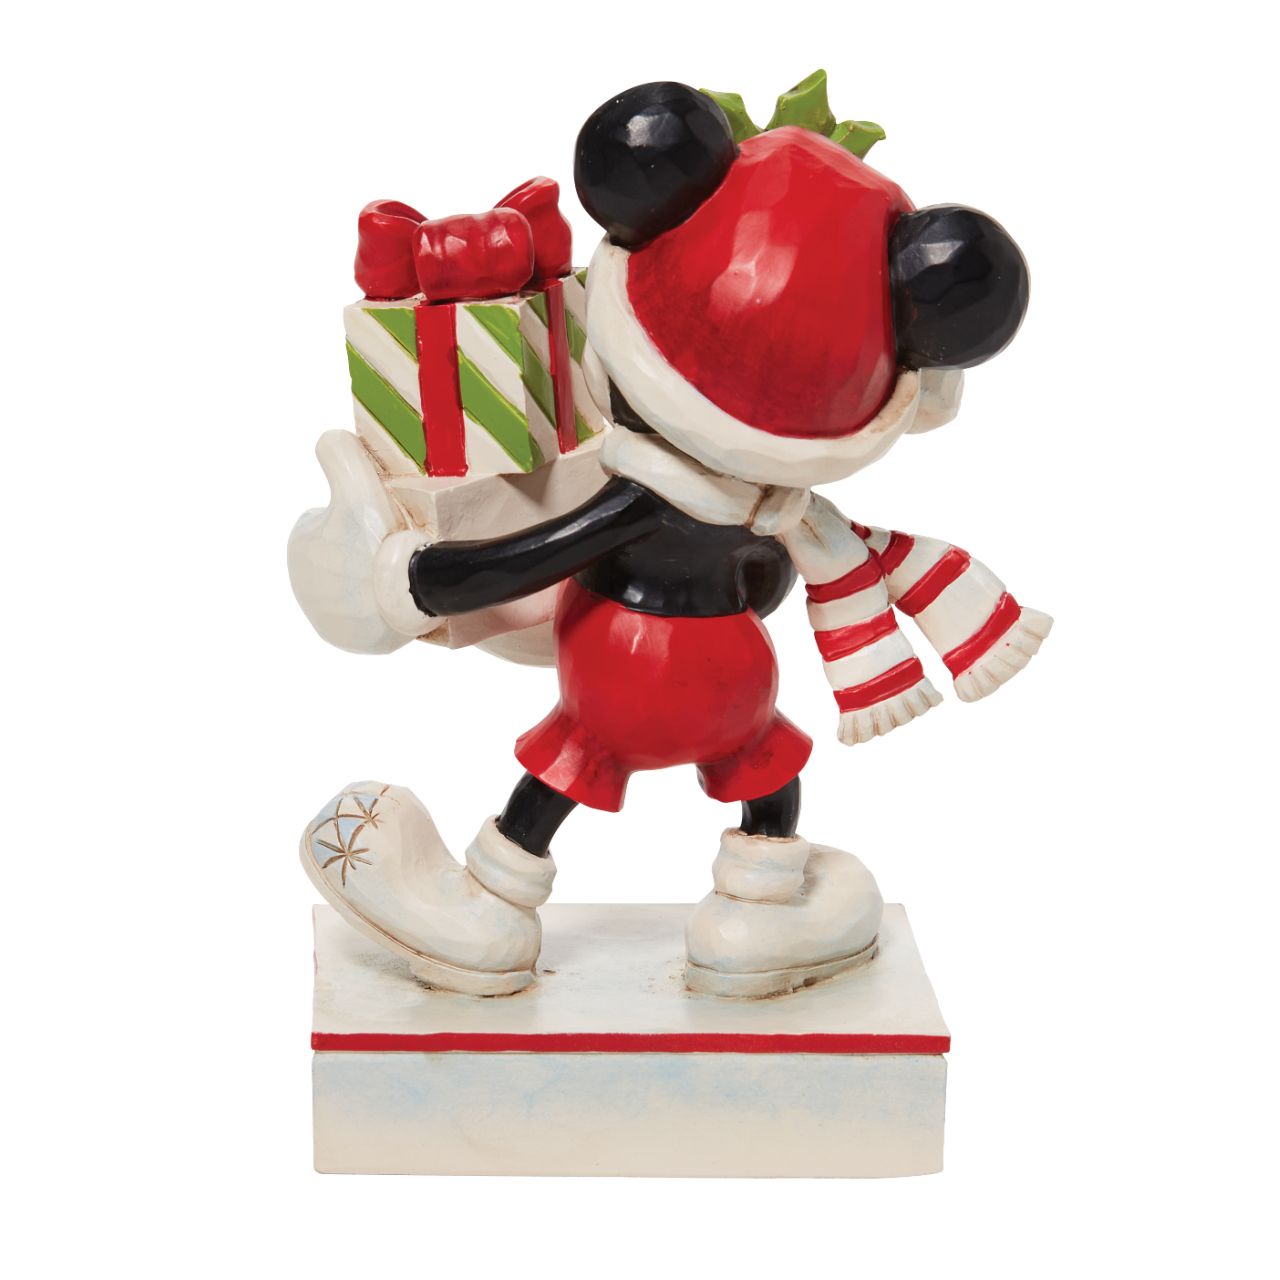 Jim Shore Christmas Mickey with Stack of Presents Figurine  Disney comes home for the holidays with this festive figurine by Jim Shore. Donning a candy cane striped scarf, Mickey wears a neighborly smile as he carries a towering stack of presents. The cheerful mouse boasts a holly brimmed Santa hat.